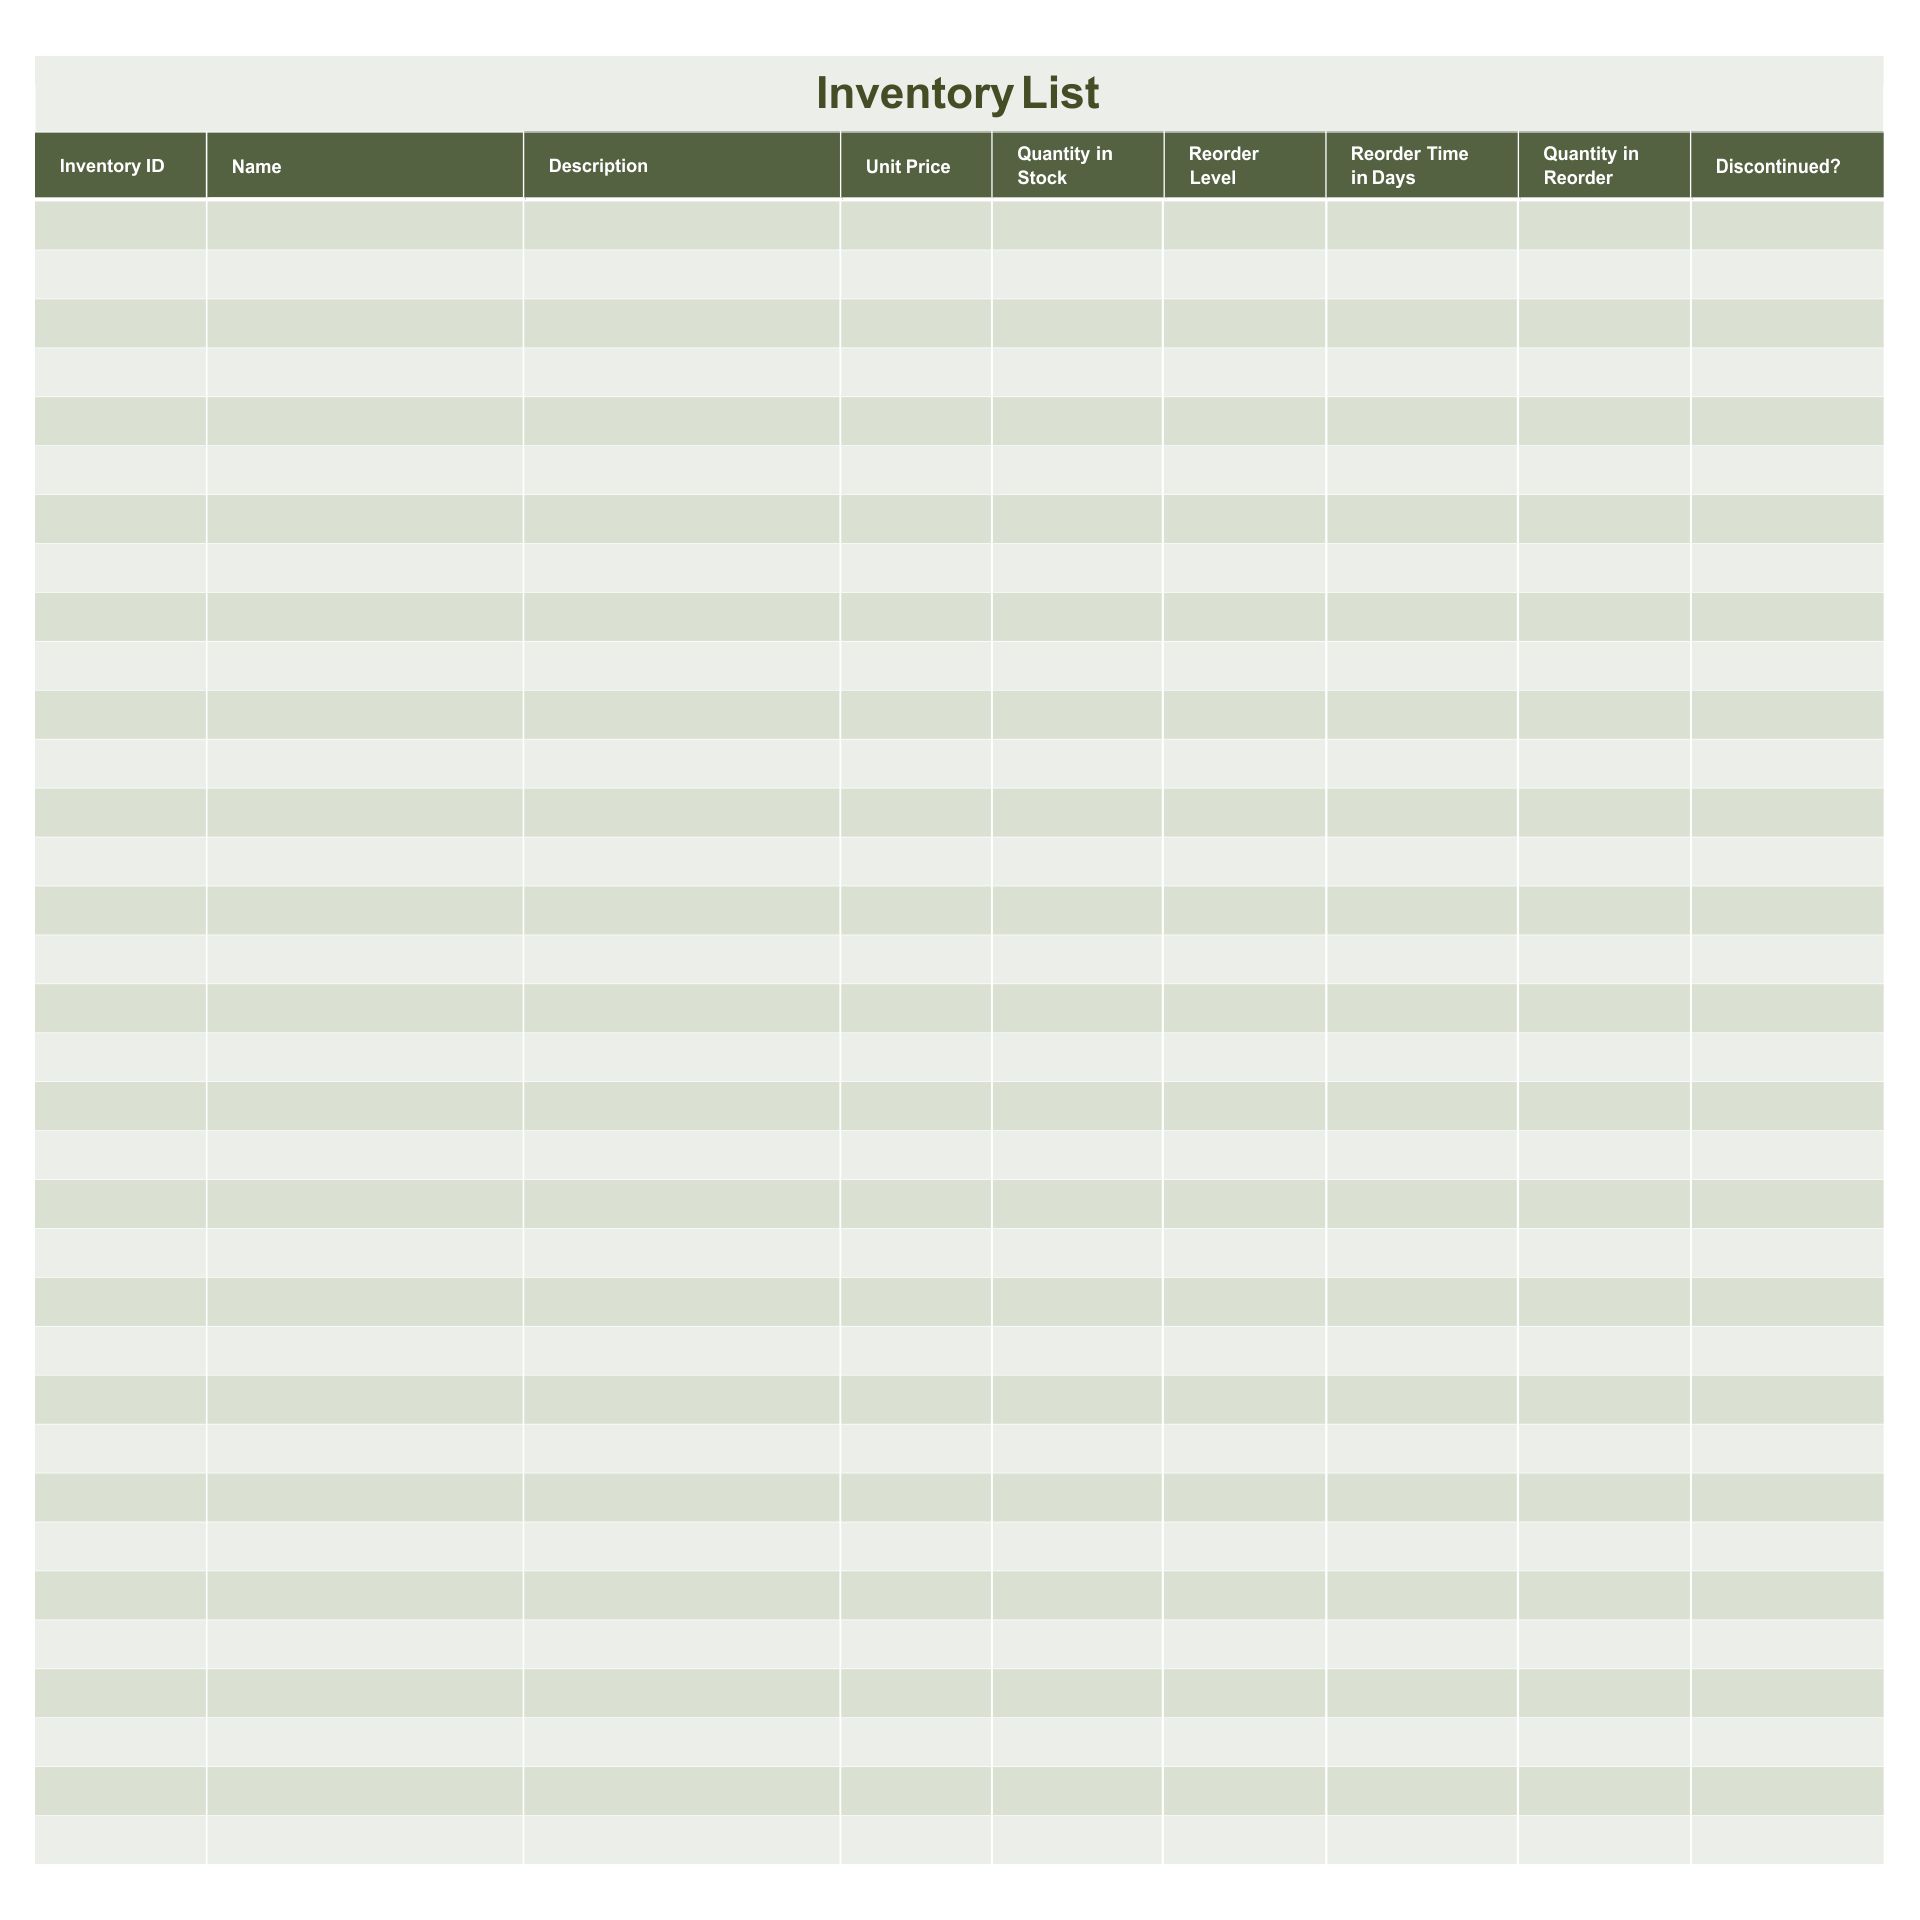 Best Images Of Free Printable Spreadsheets For Business Printable